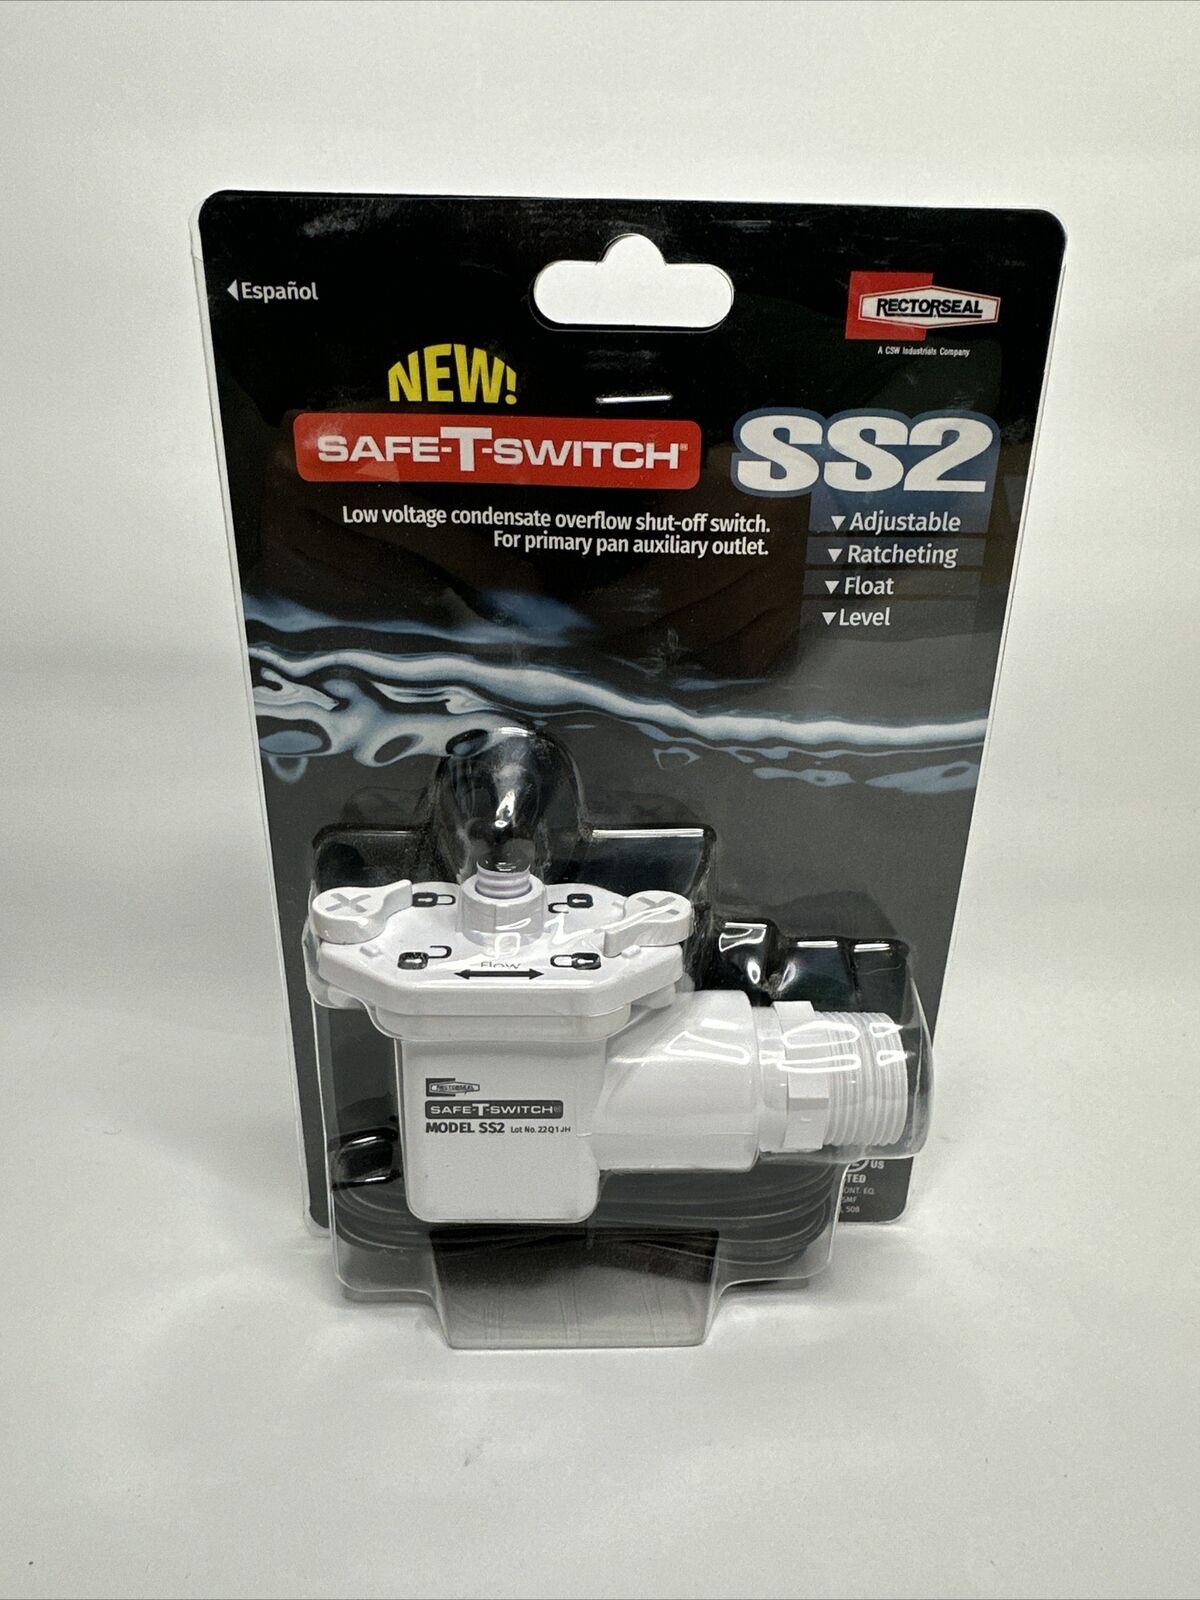 RECTORSEAL NEW SAFE-T-SWITCH SS2 #97087 Count Condensate Overflow shut-off